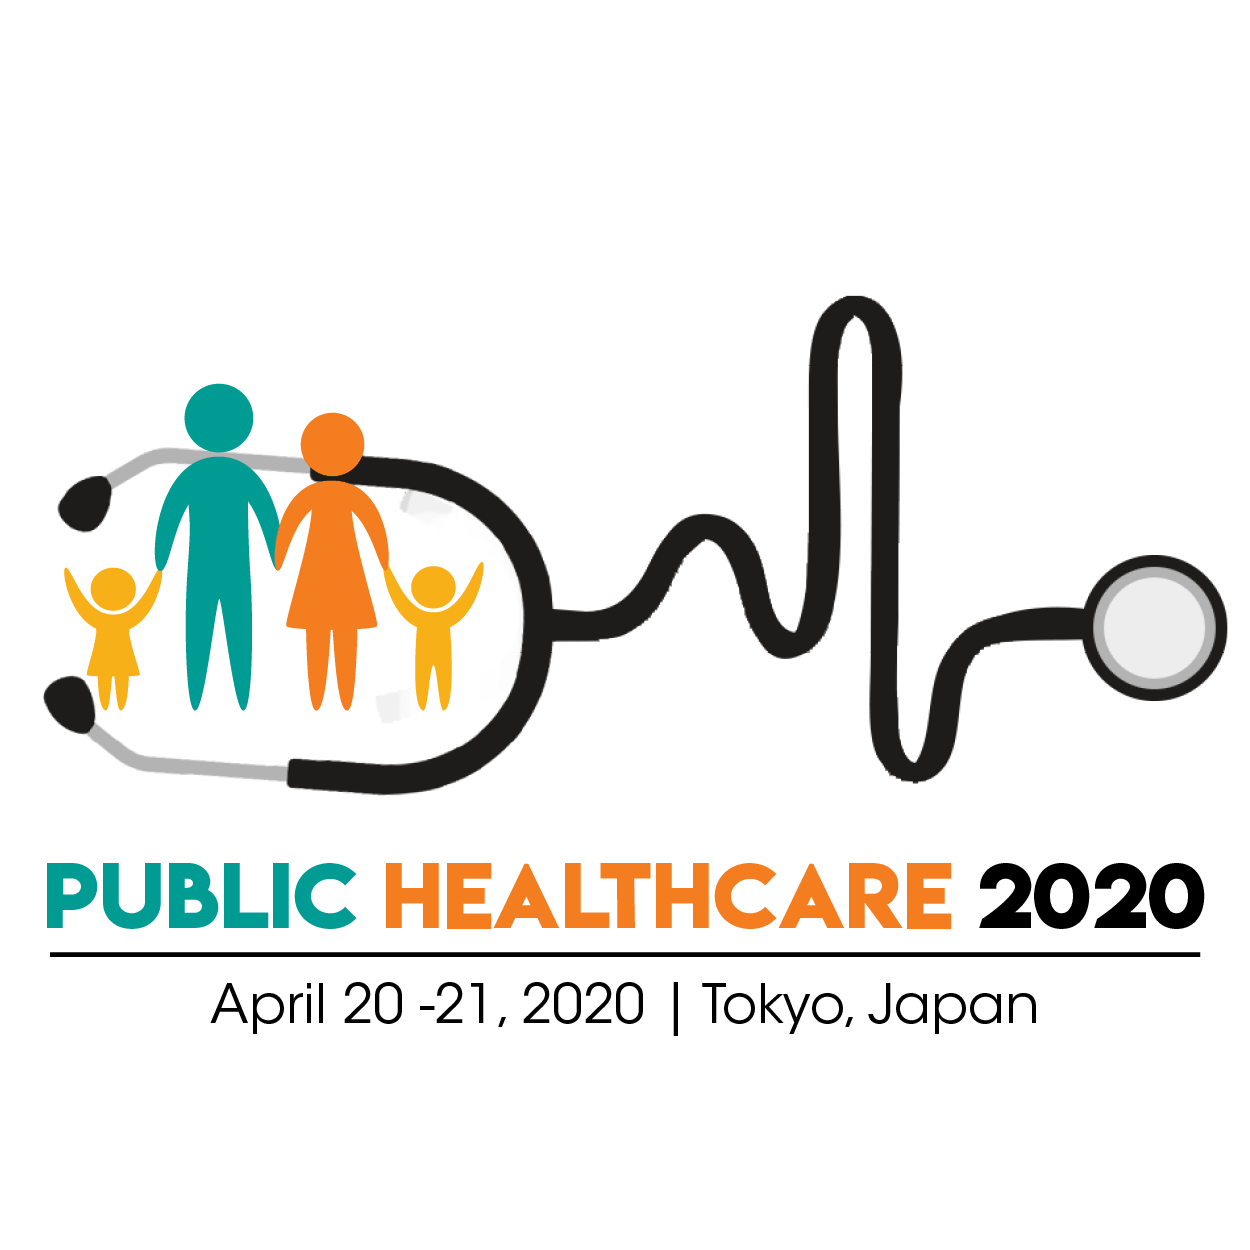 7th International Conference on Public Healthcare and Epidemiology